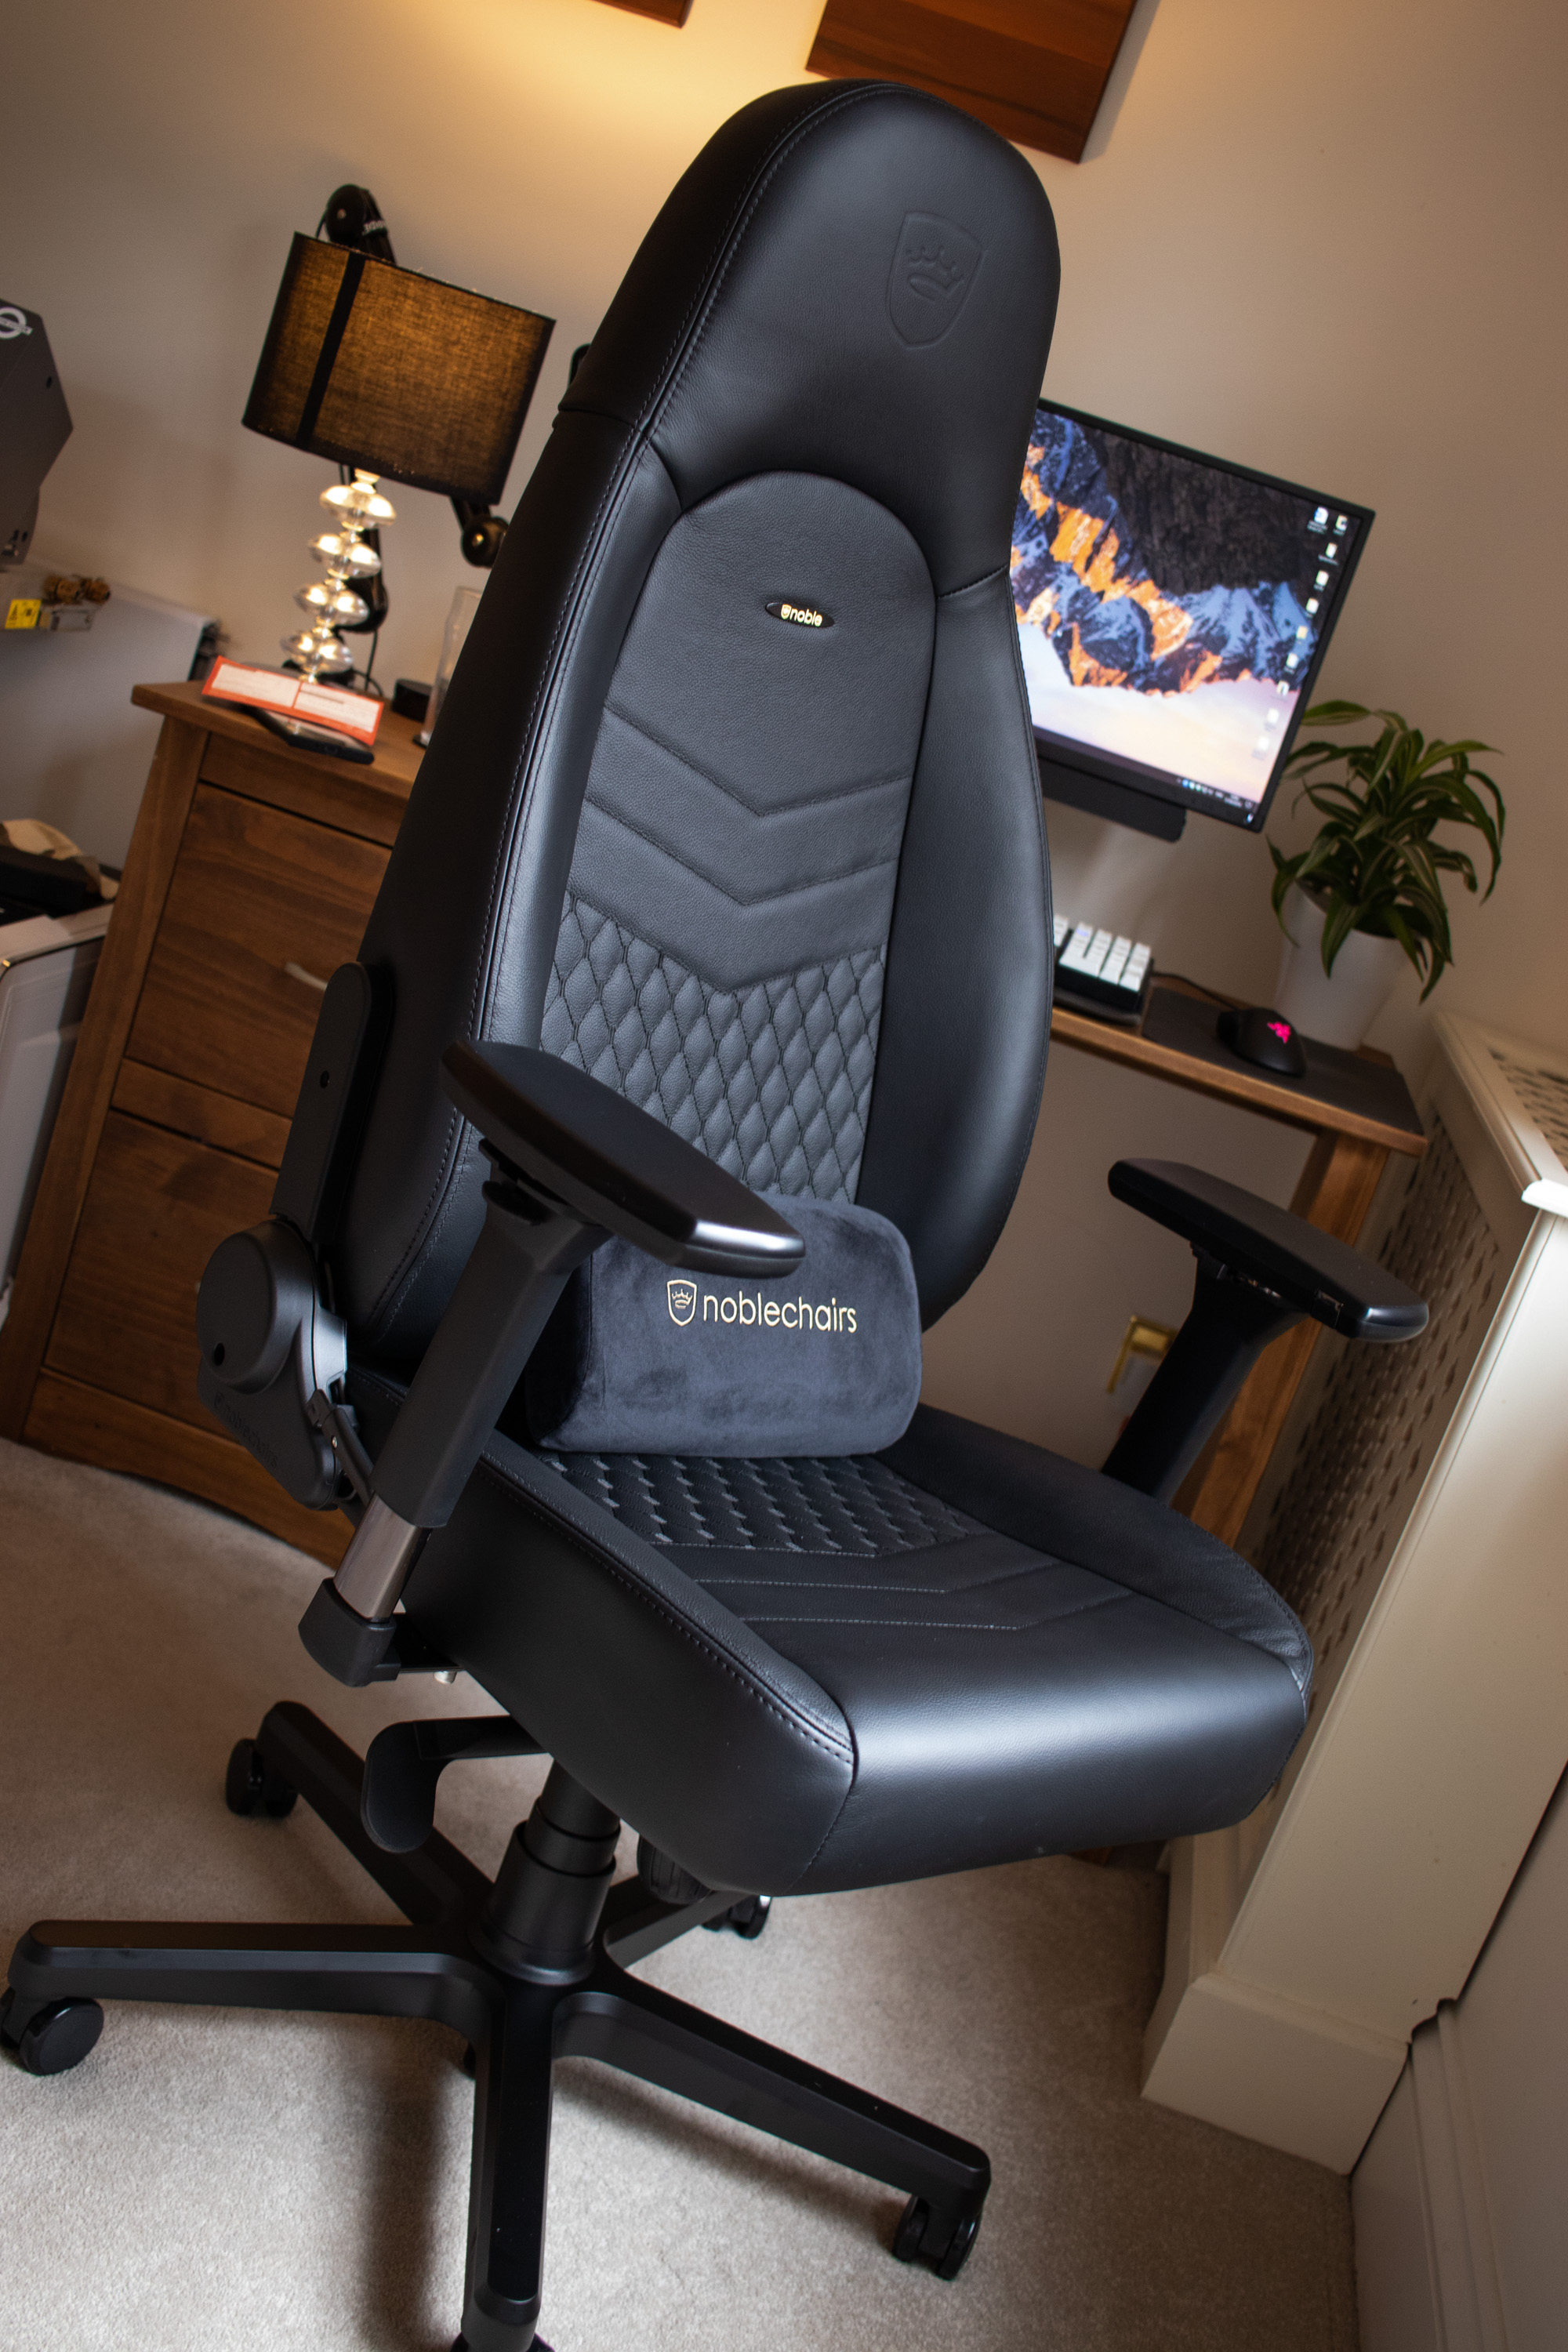 honest noblechairs icon gaming chair review  real leather